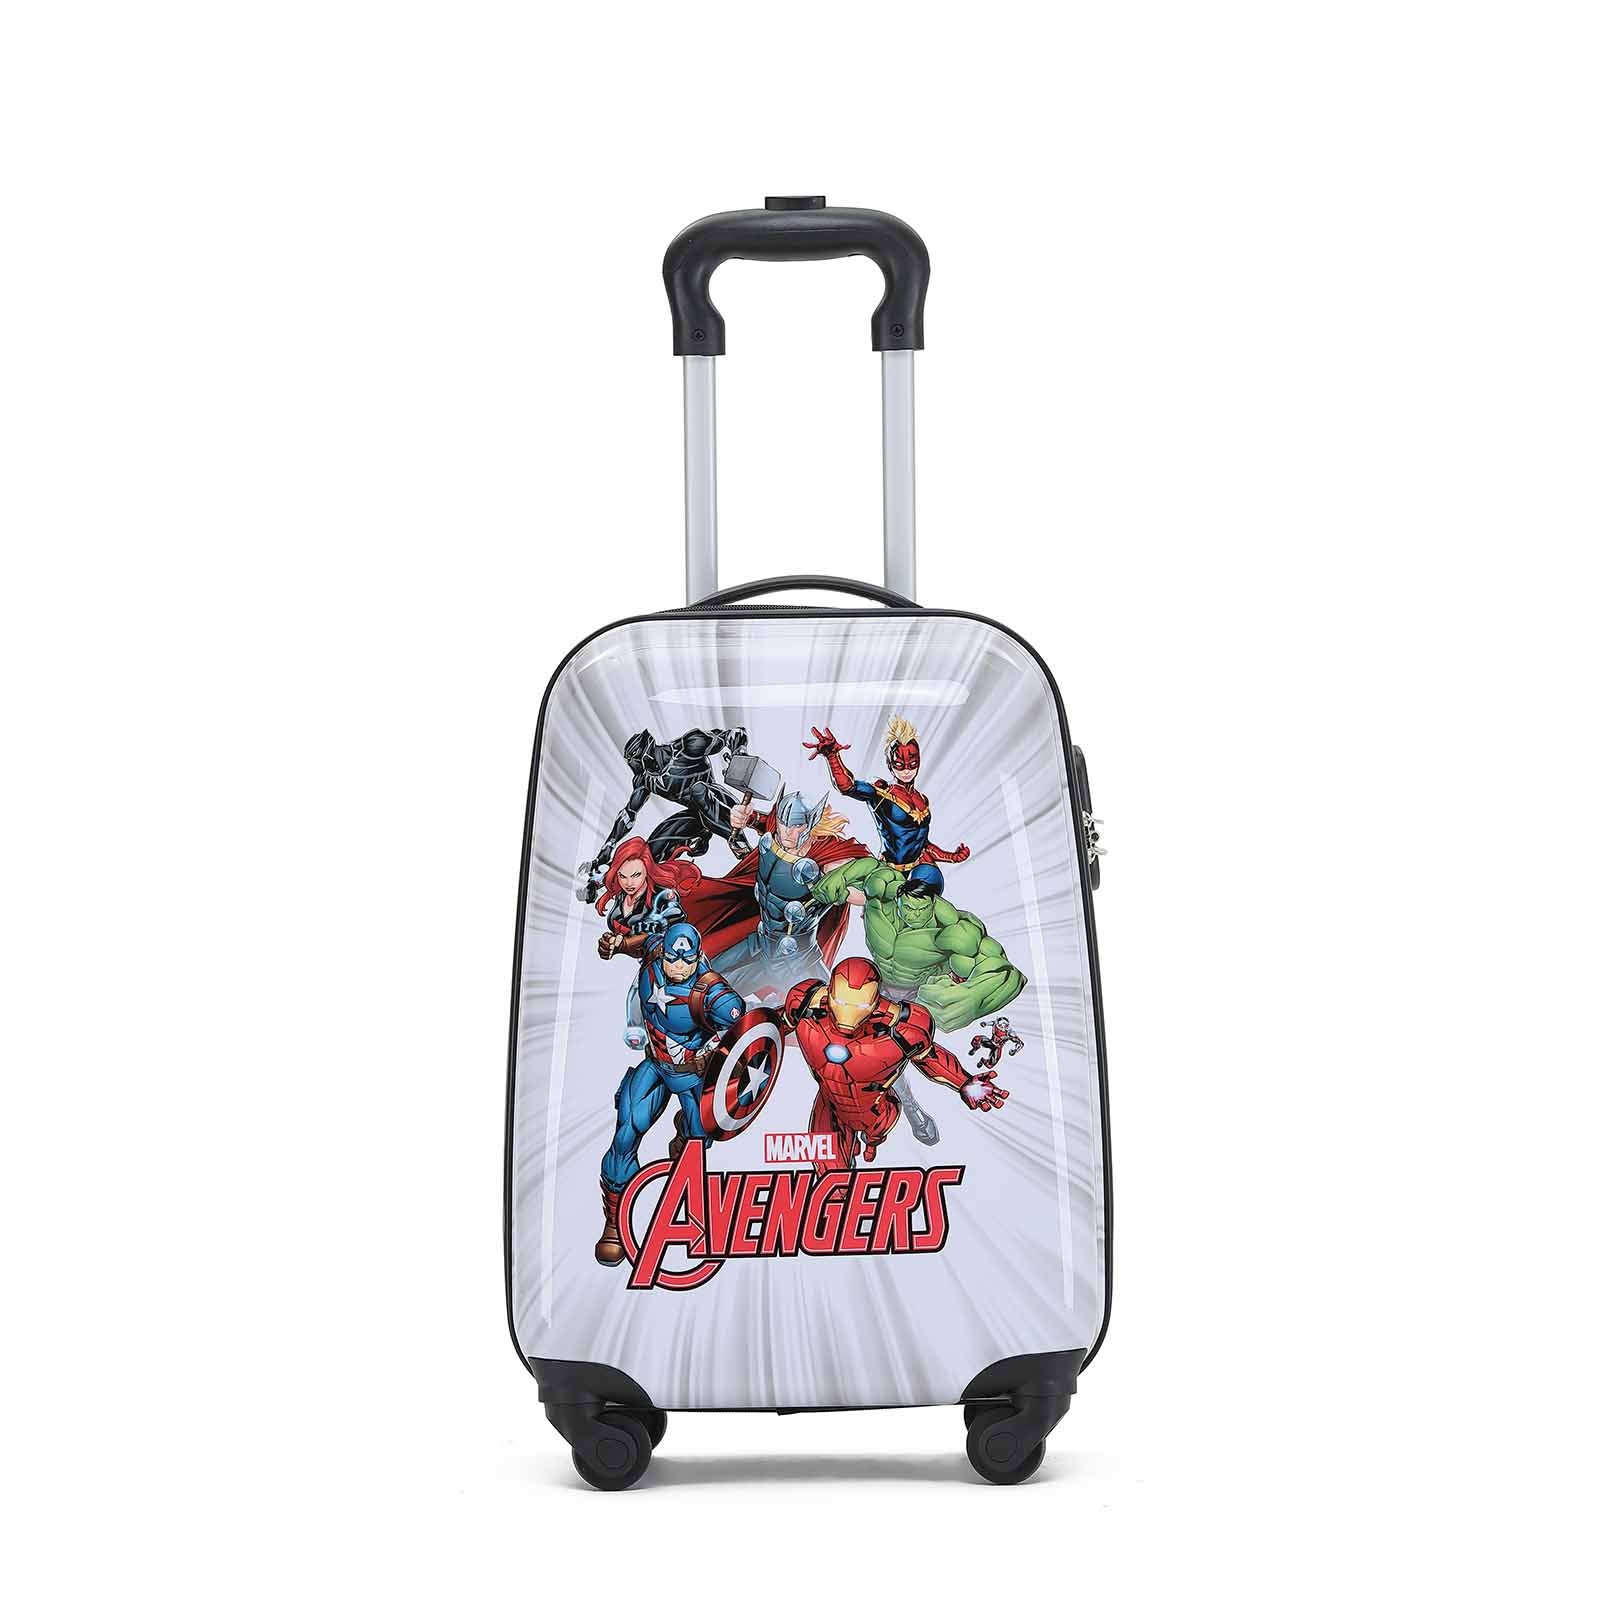 Marvel Avengers 17inch Carry-On Suitcase